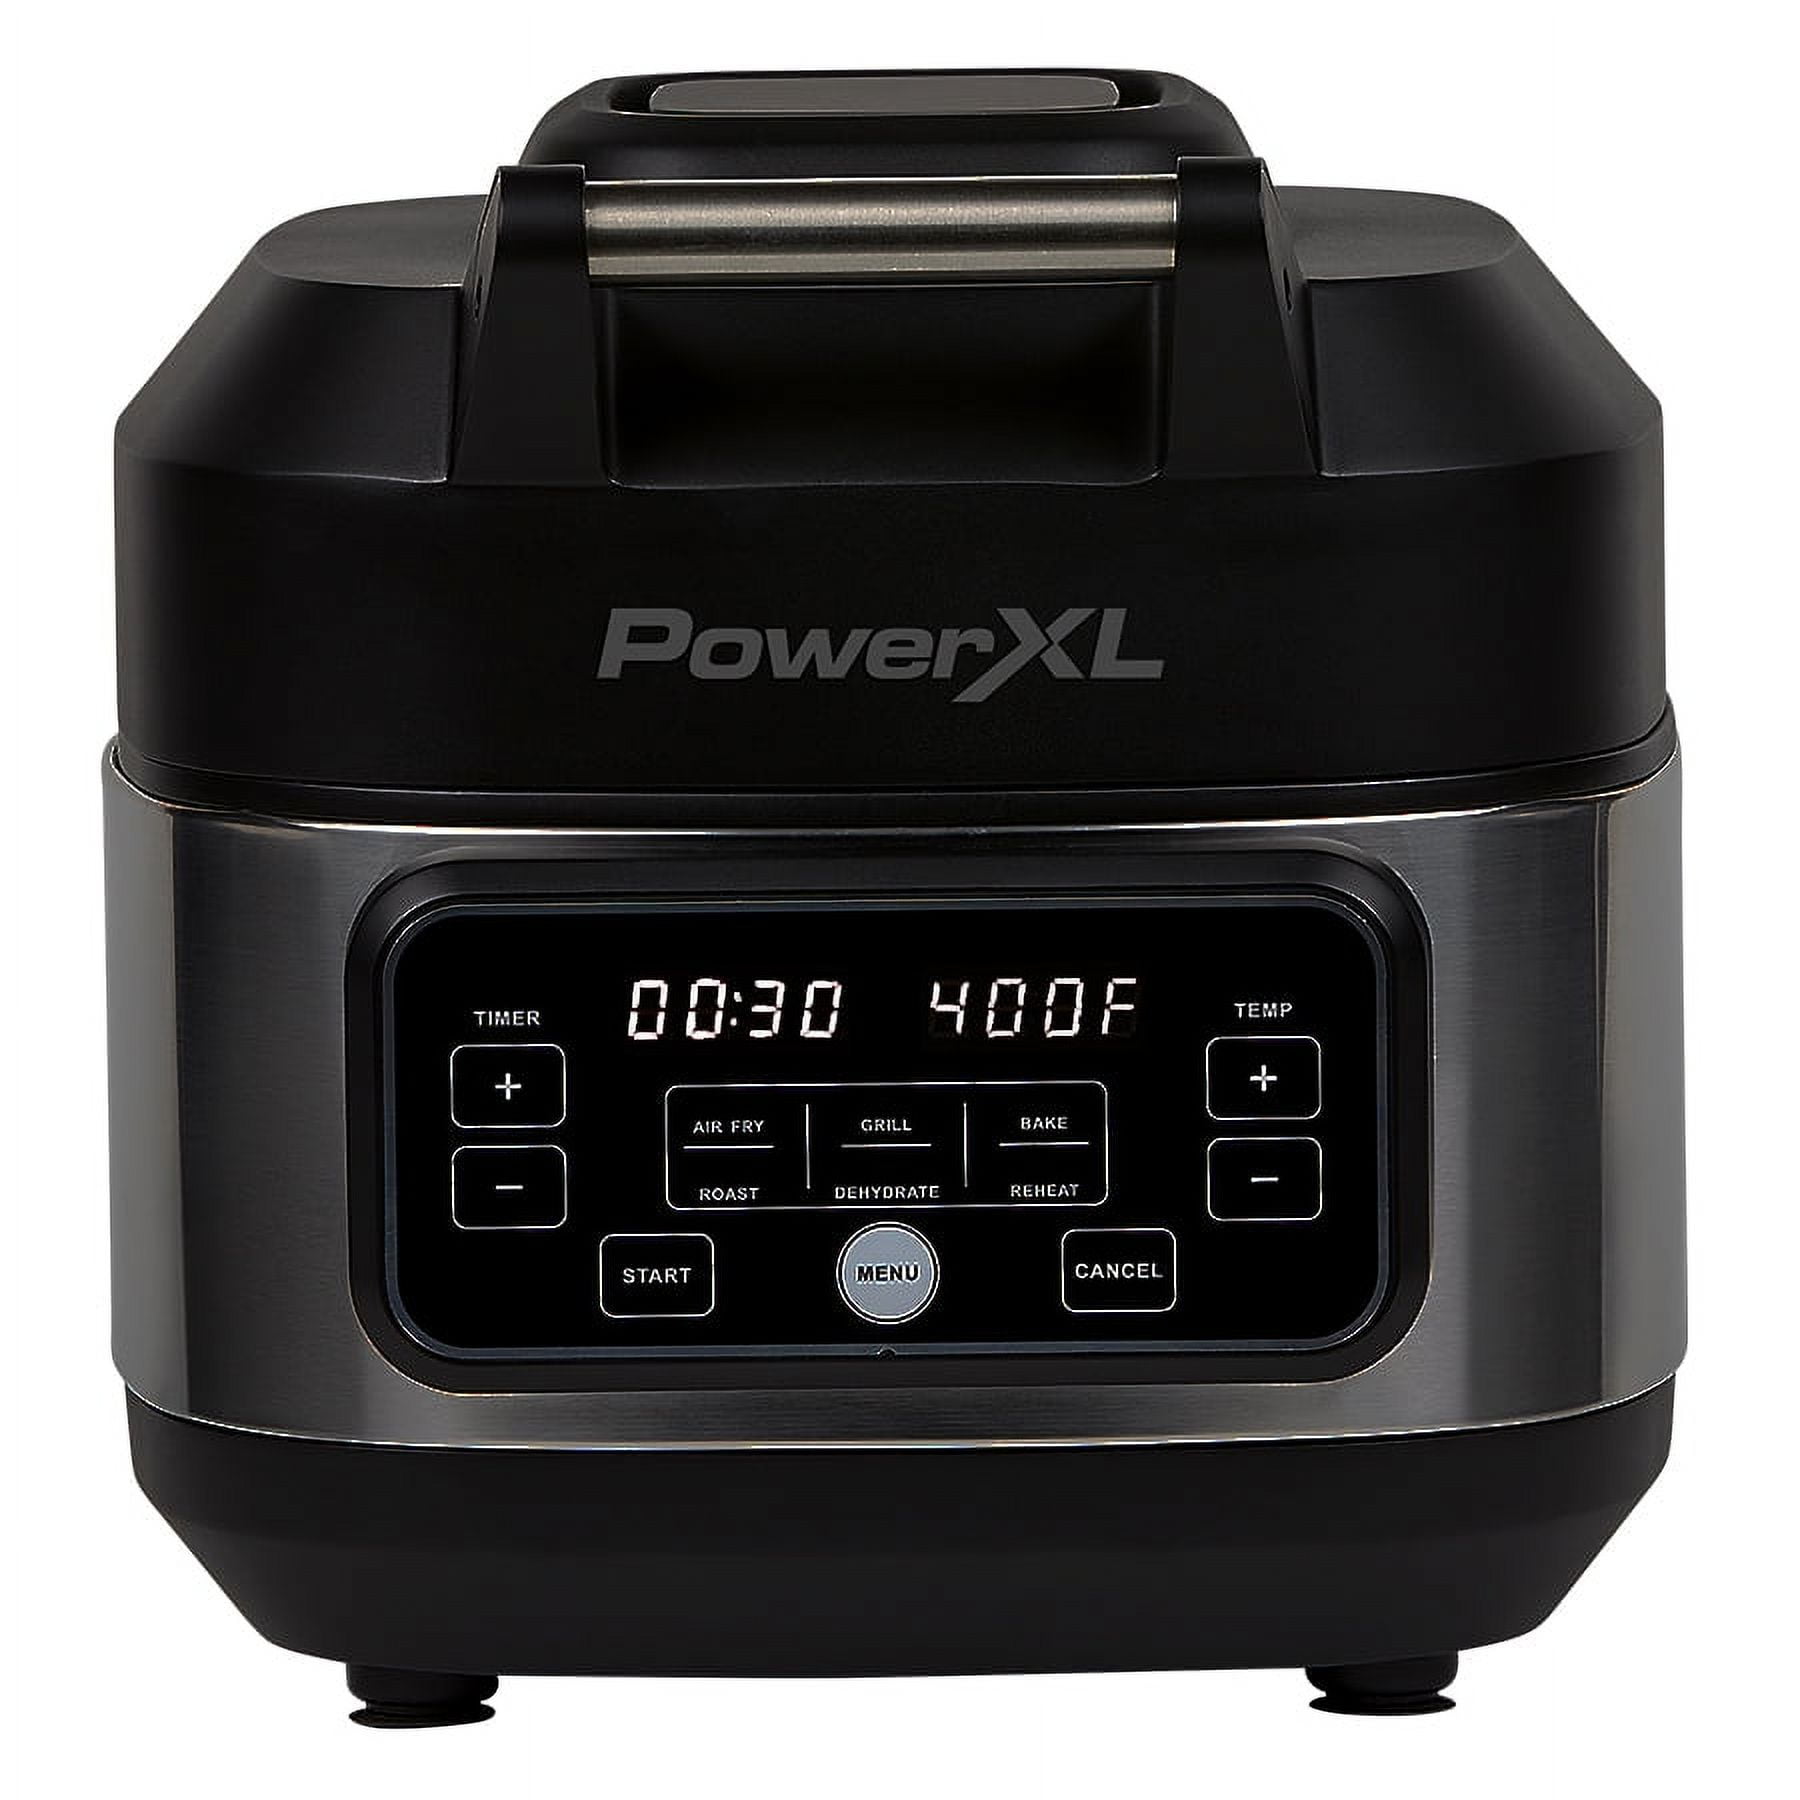 PowerXL Grill + Air Fryer Multi-Cooker Only $69.99 Shipped on Target.com  (Regularly $190)